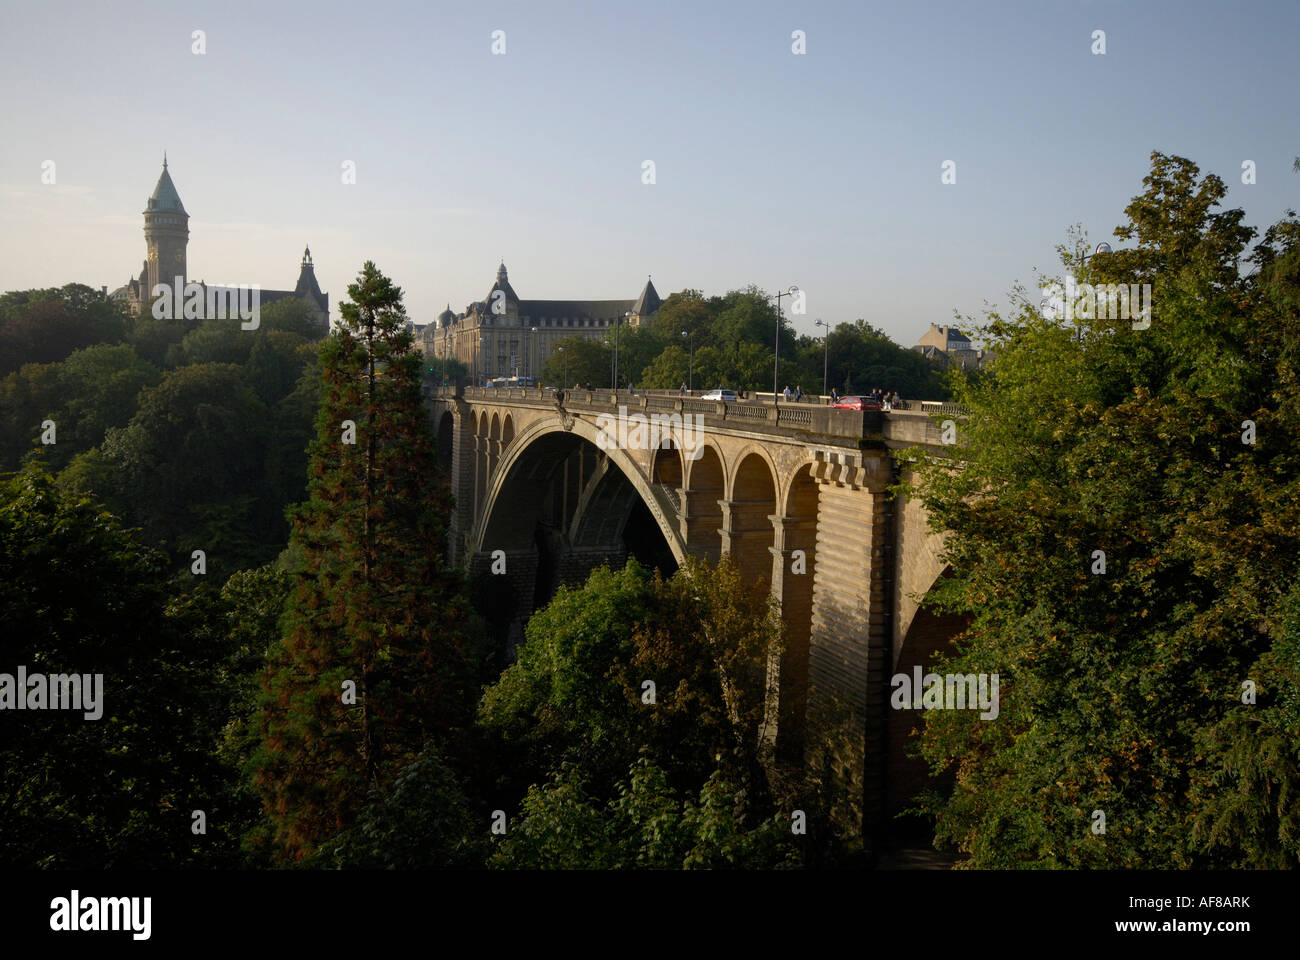 View at a bridge at Petrusse valley, Luxembourg city, Luxembourg, Europe Stock Photo